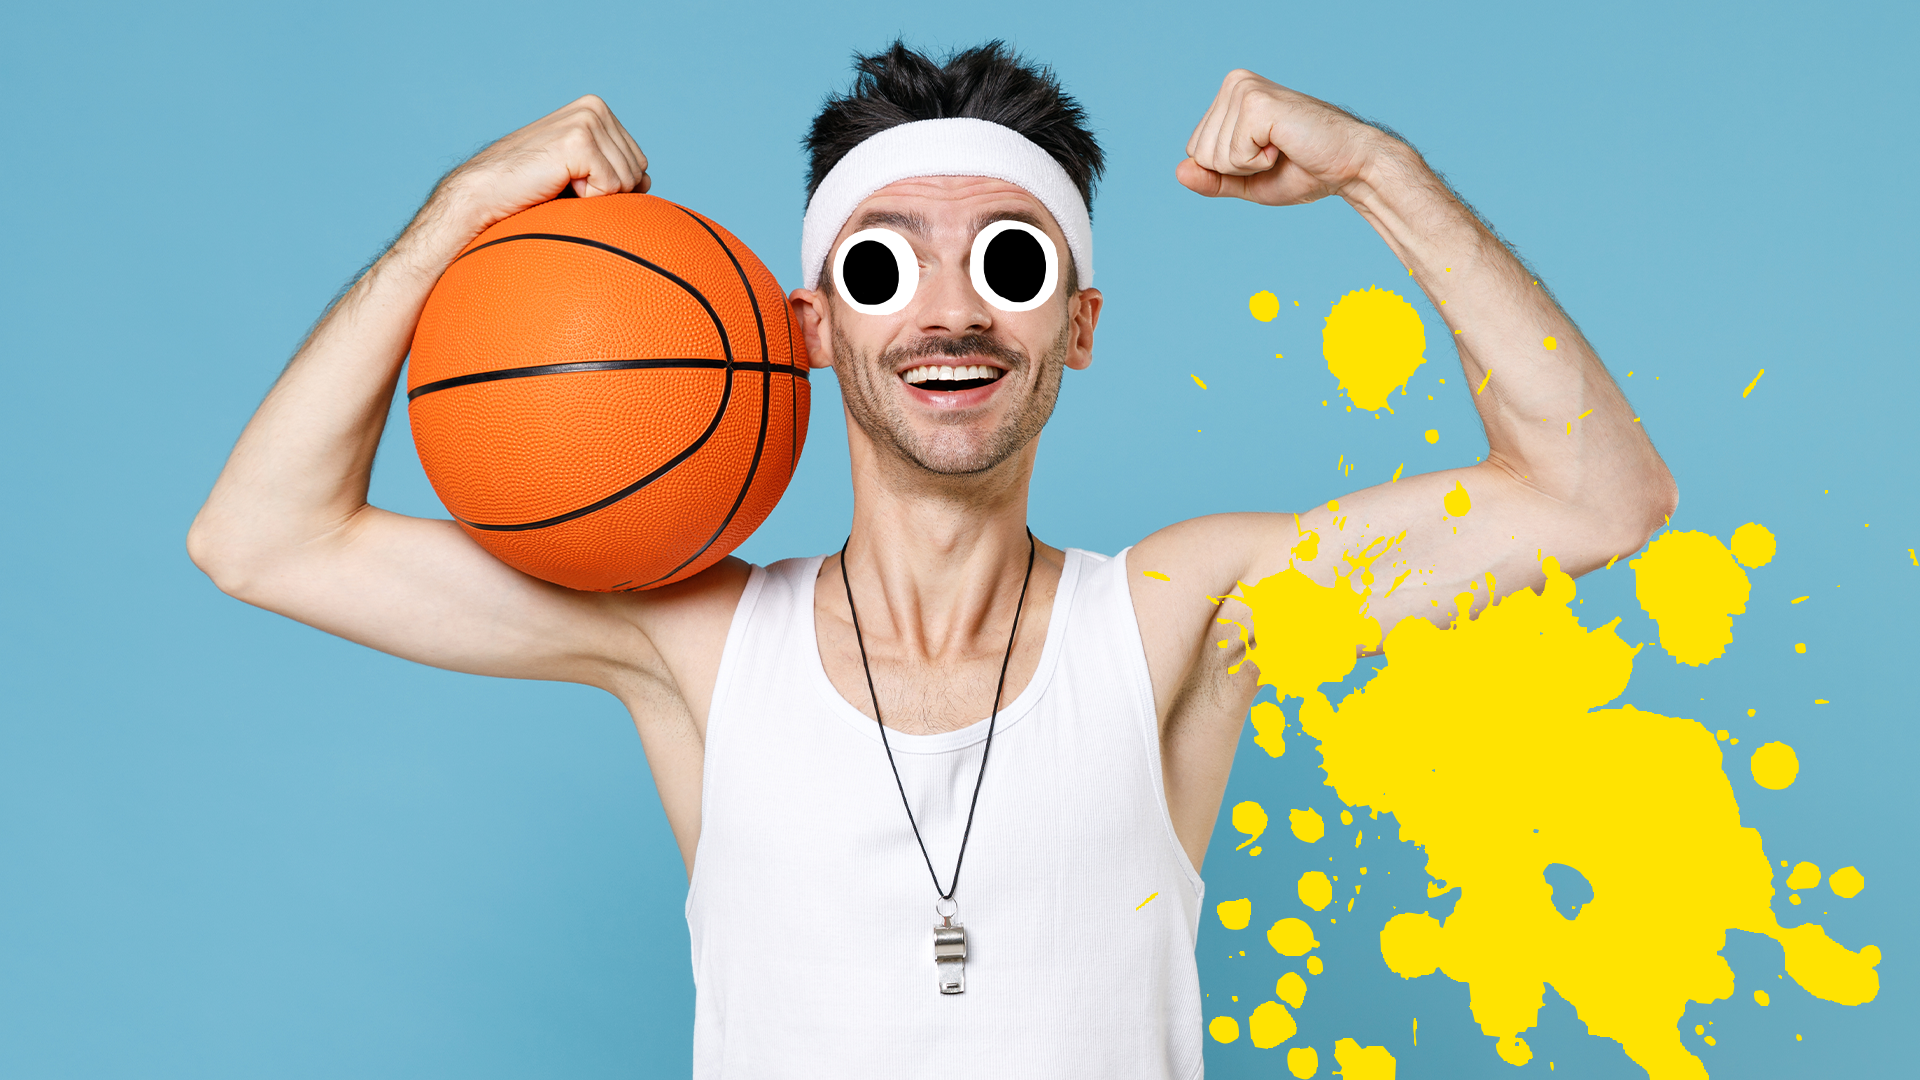 Man with basketball on blue background with splat